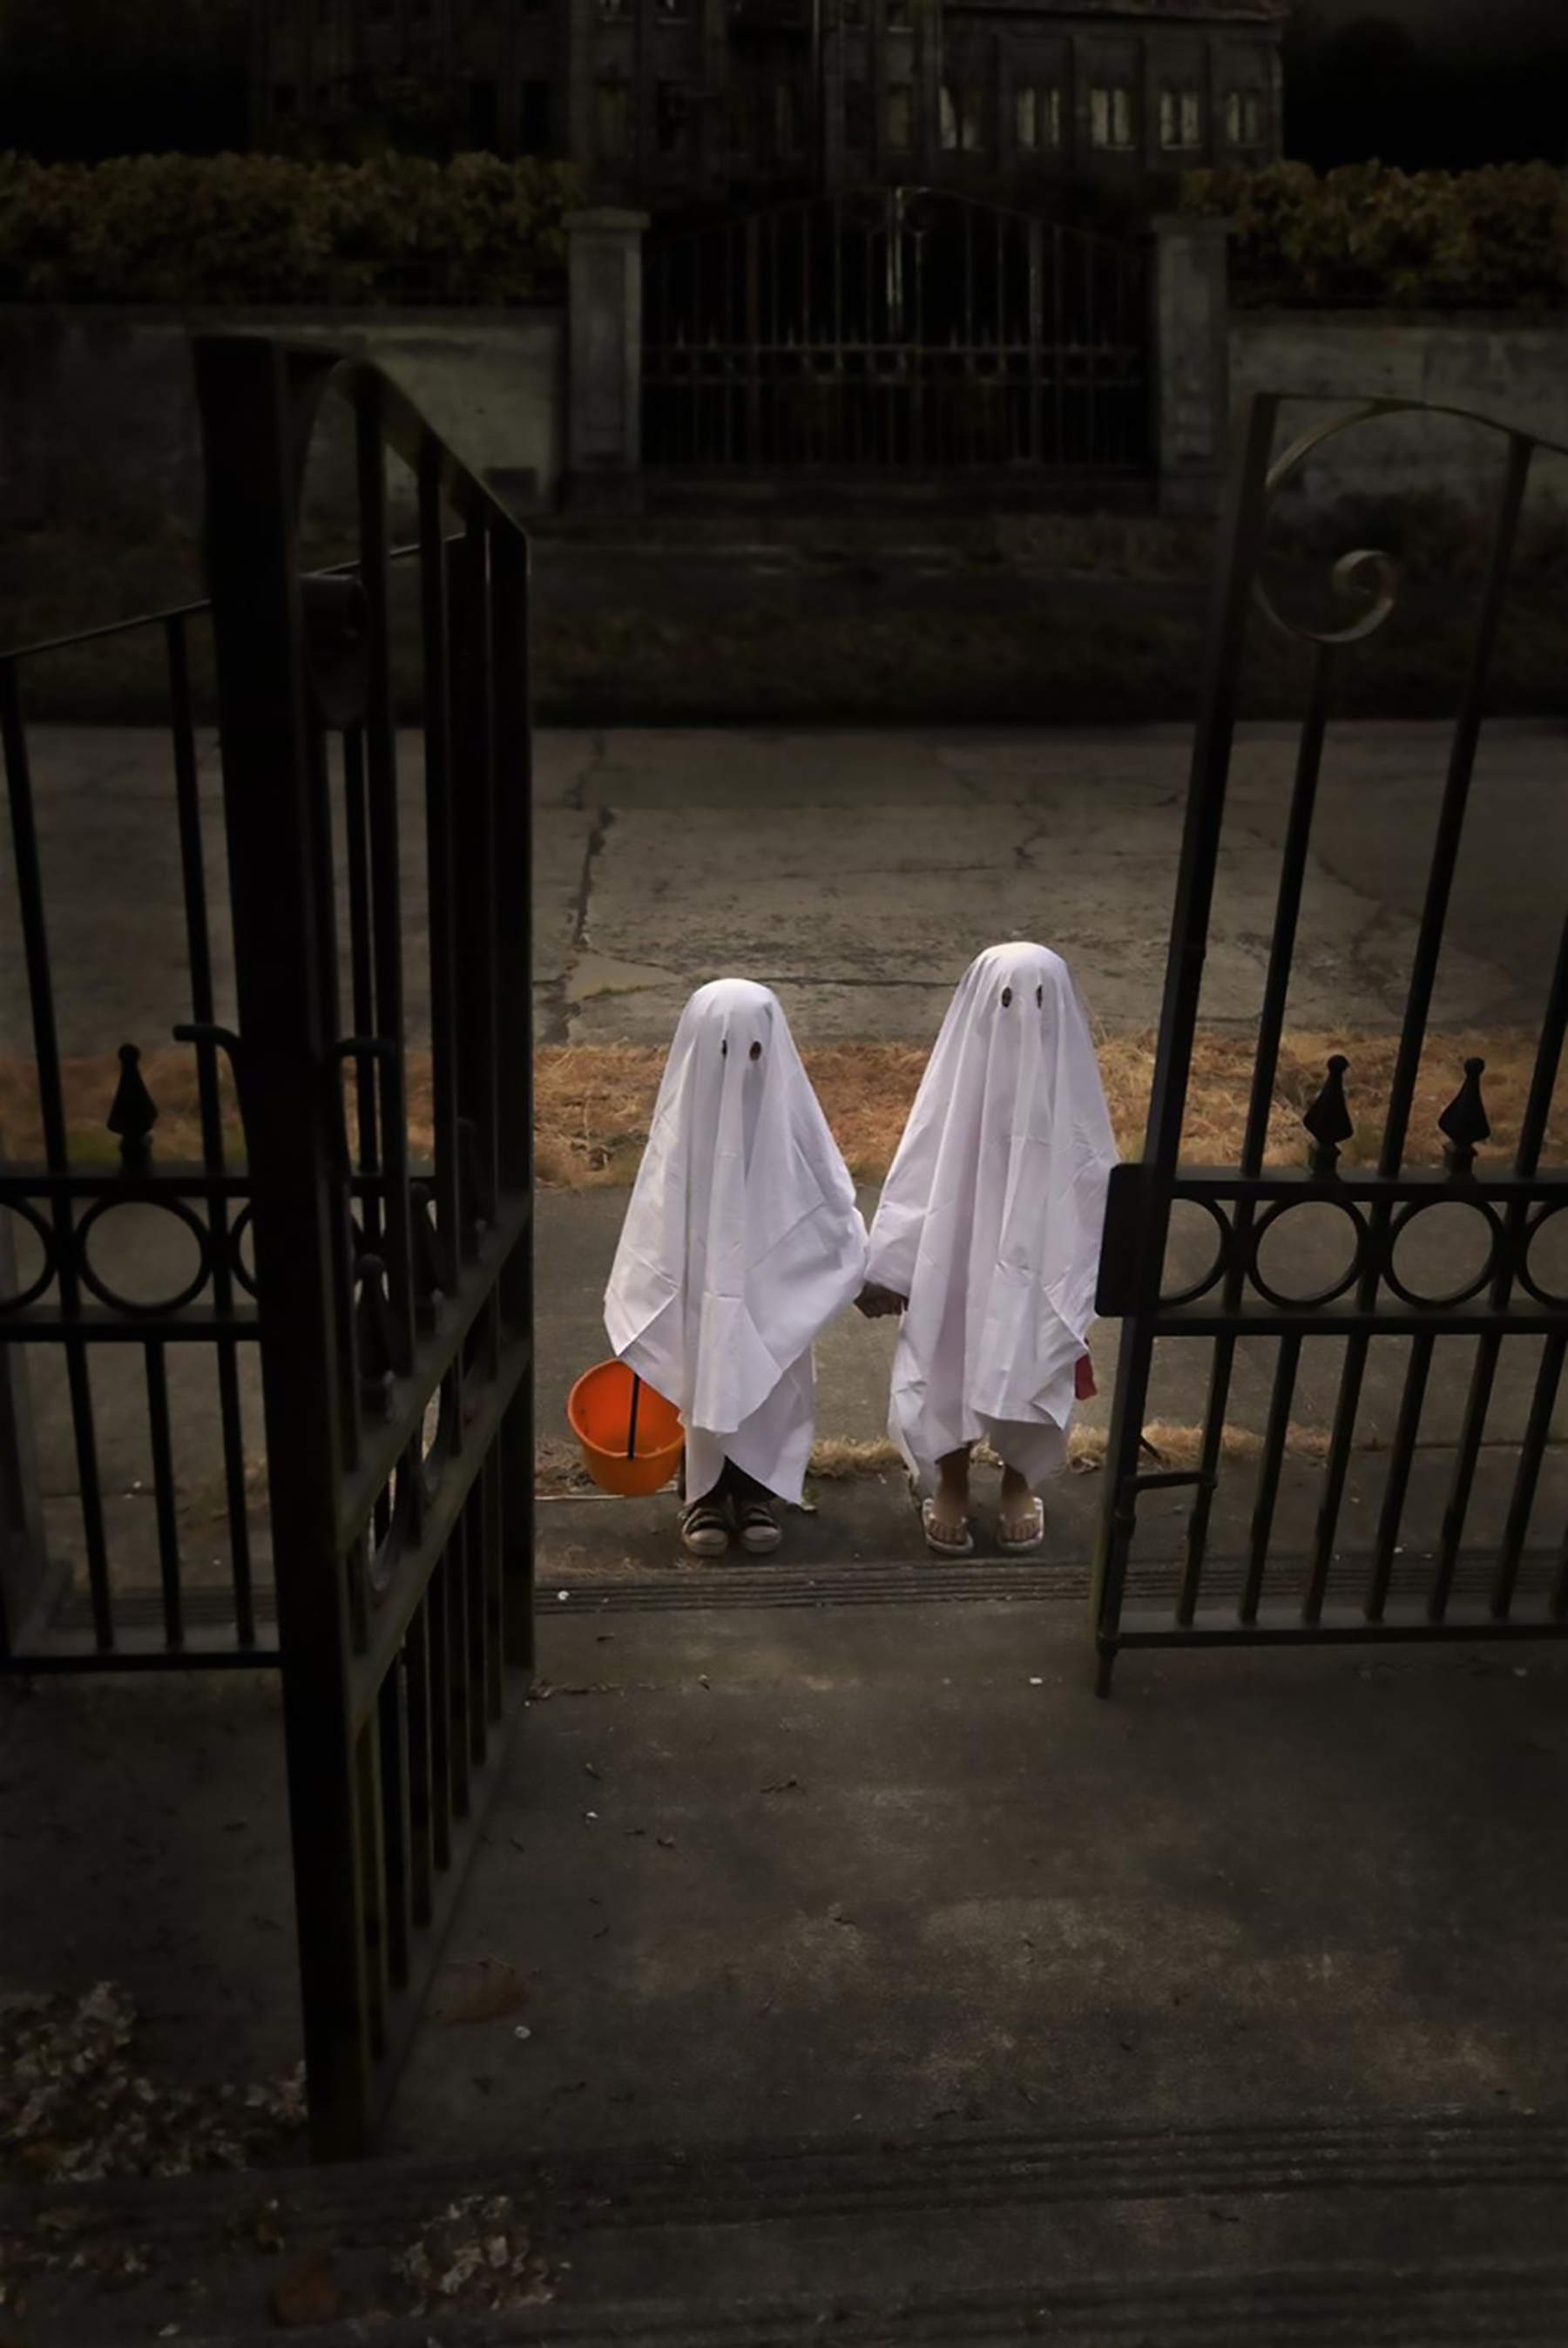 5 Things To Do On Halloween Besides Trick-or-Treating